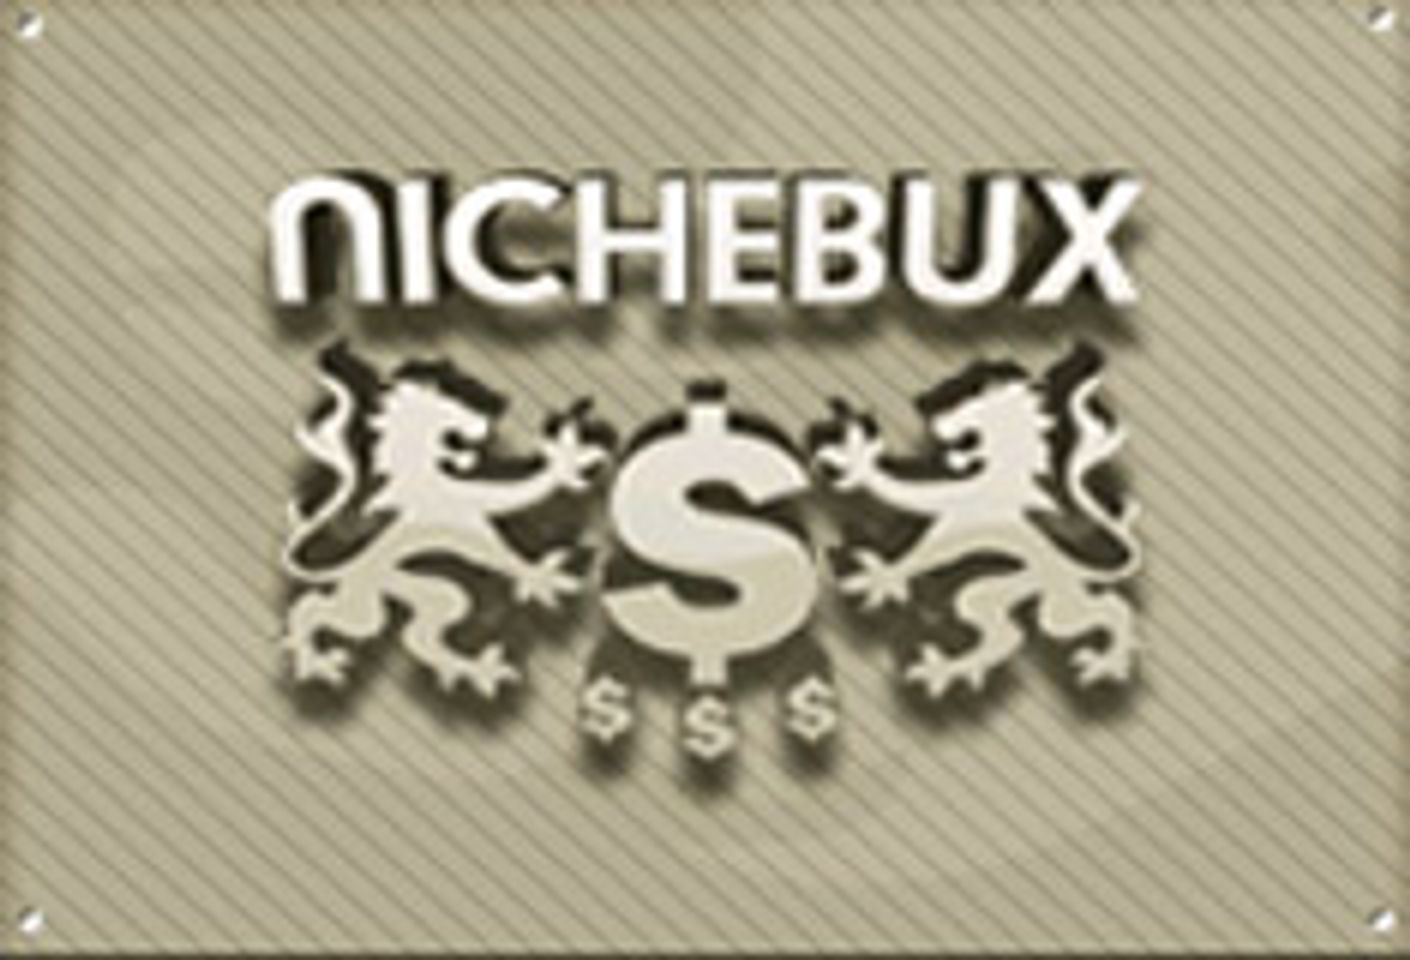 Stage One Launches Nichebux.com Affiliate Program